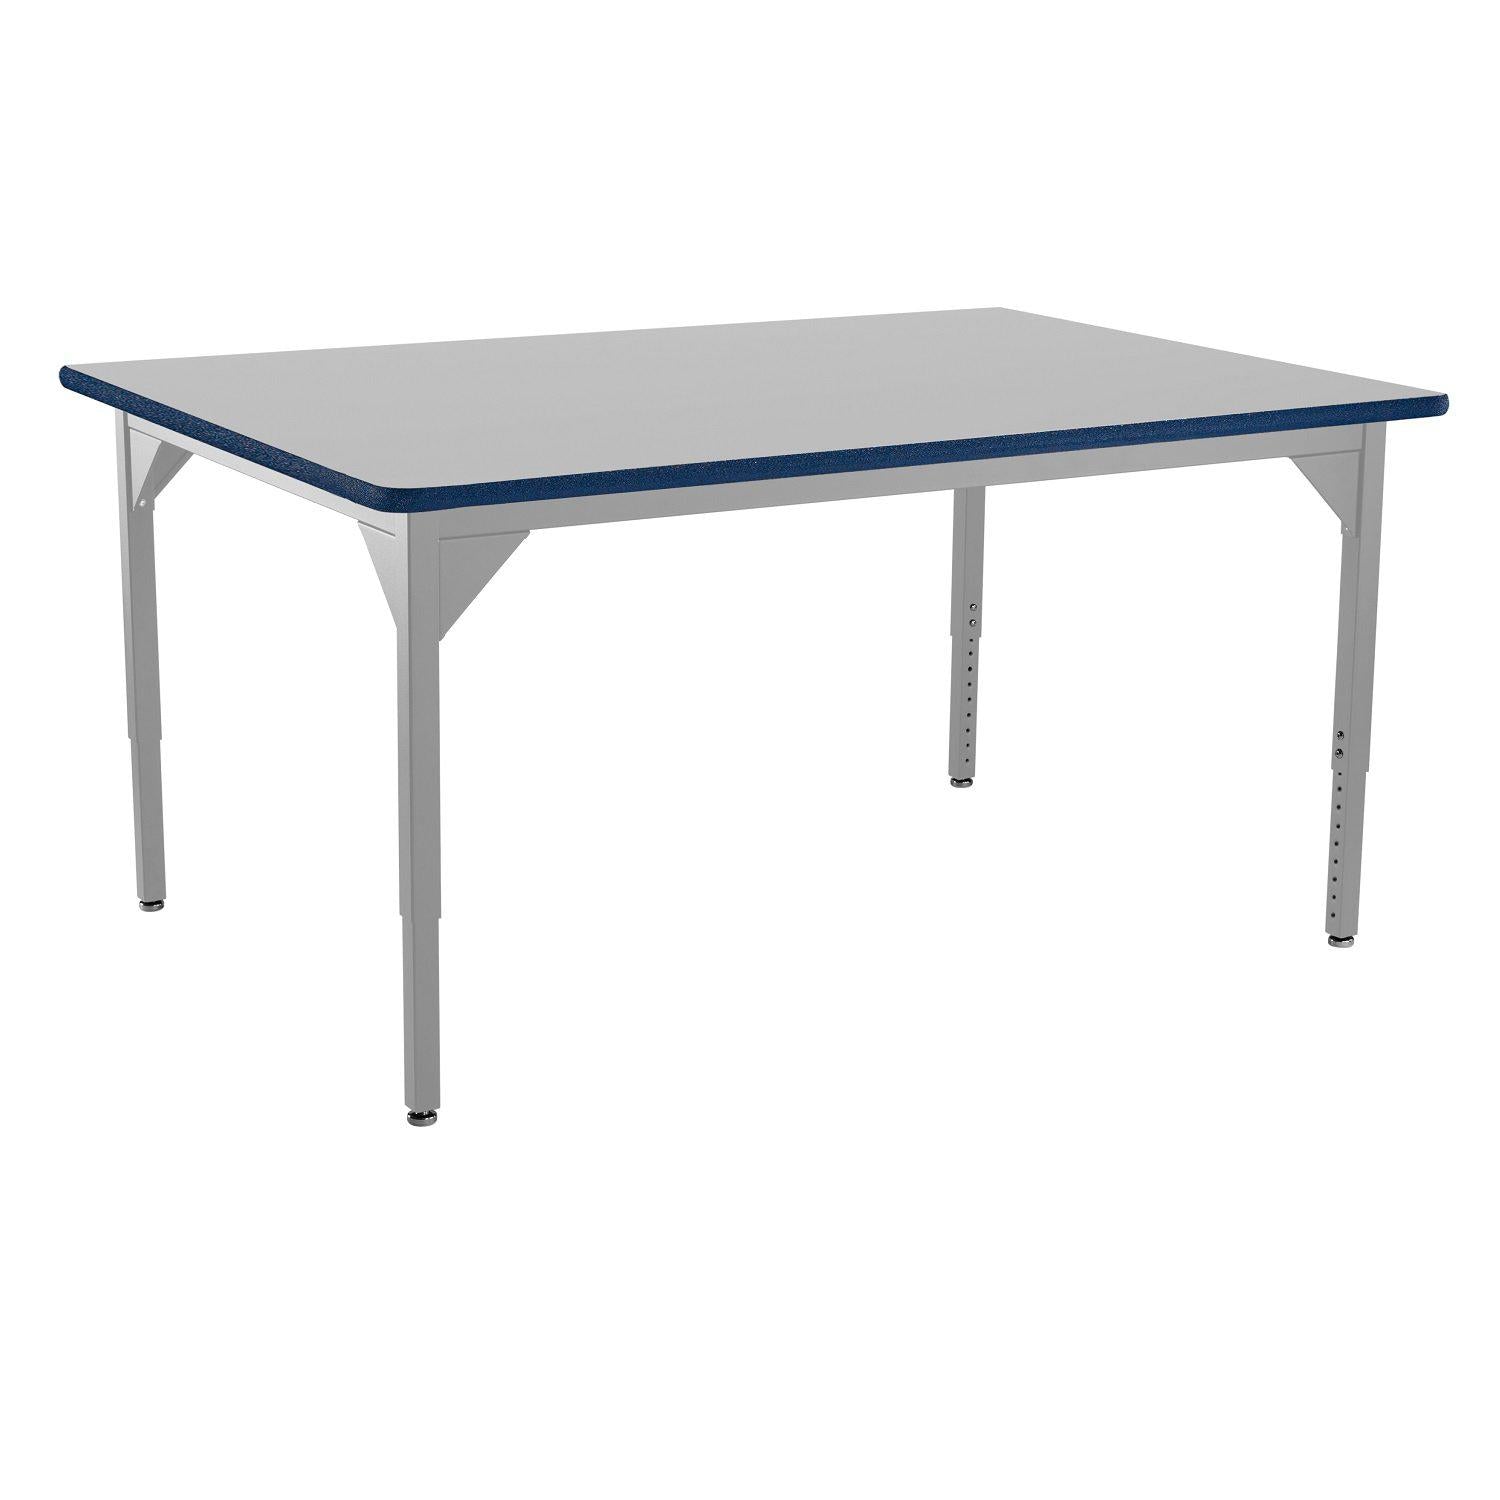 Heavy-Duty Height-Adjustable Utility Table, Soft Grey Frame, 42" x 42", Supreme High-Pressure Laminate Top with Black ProtectEdge